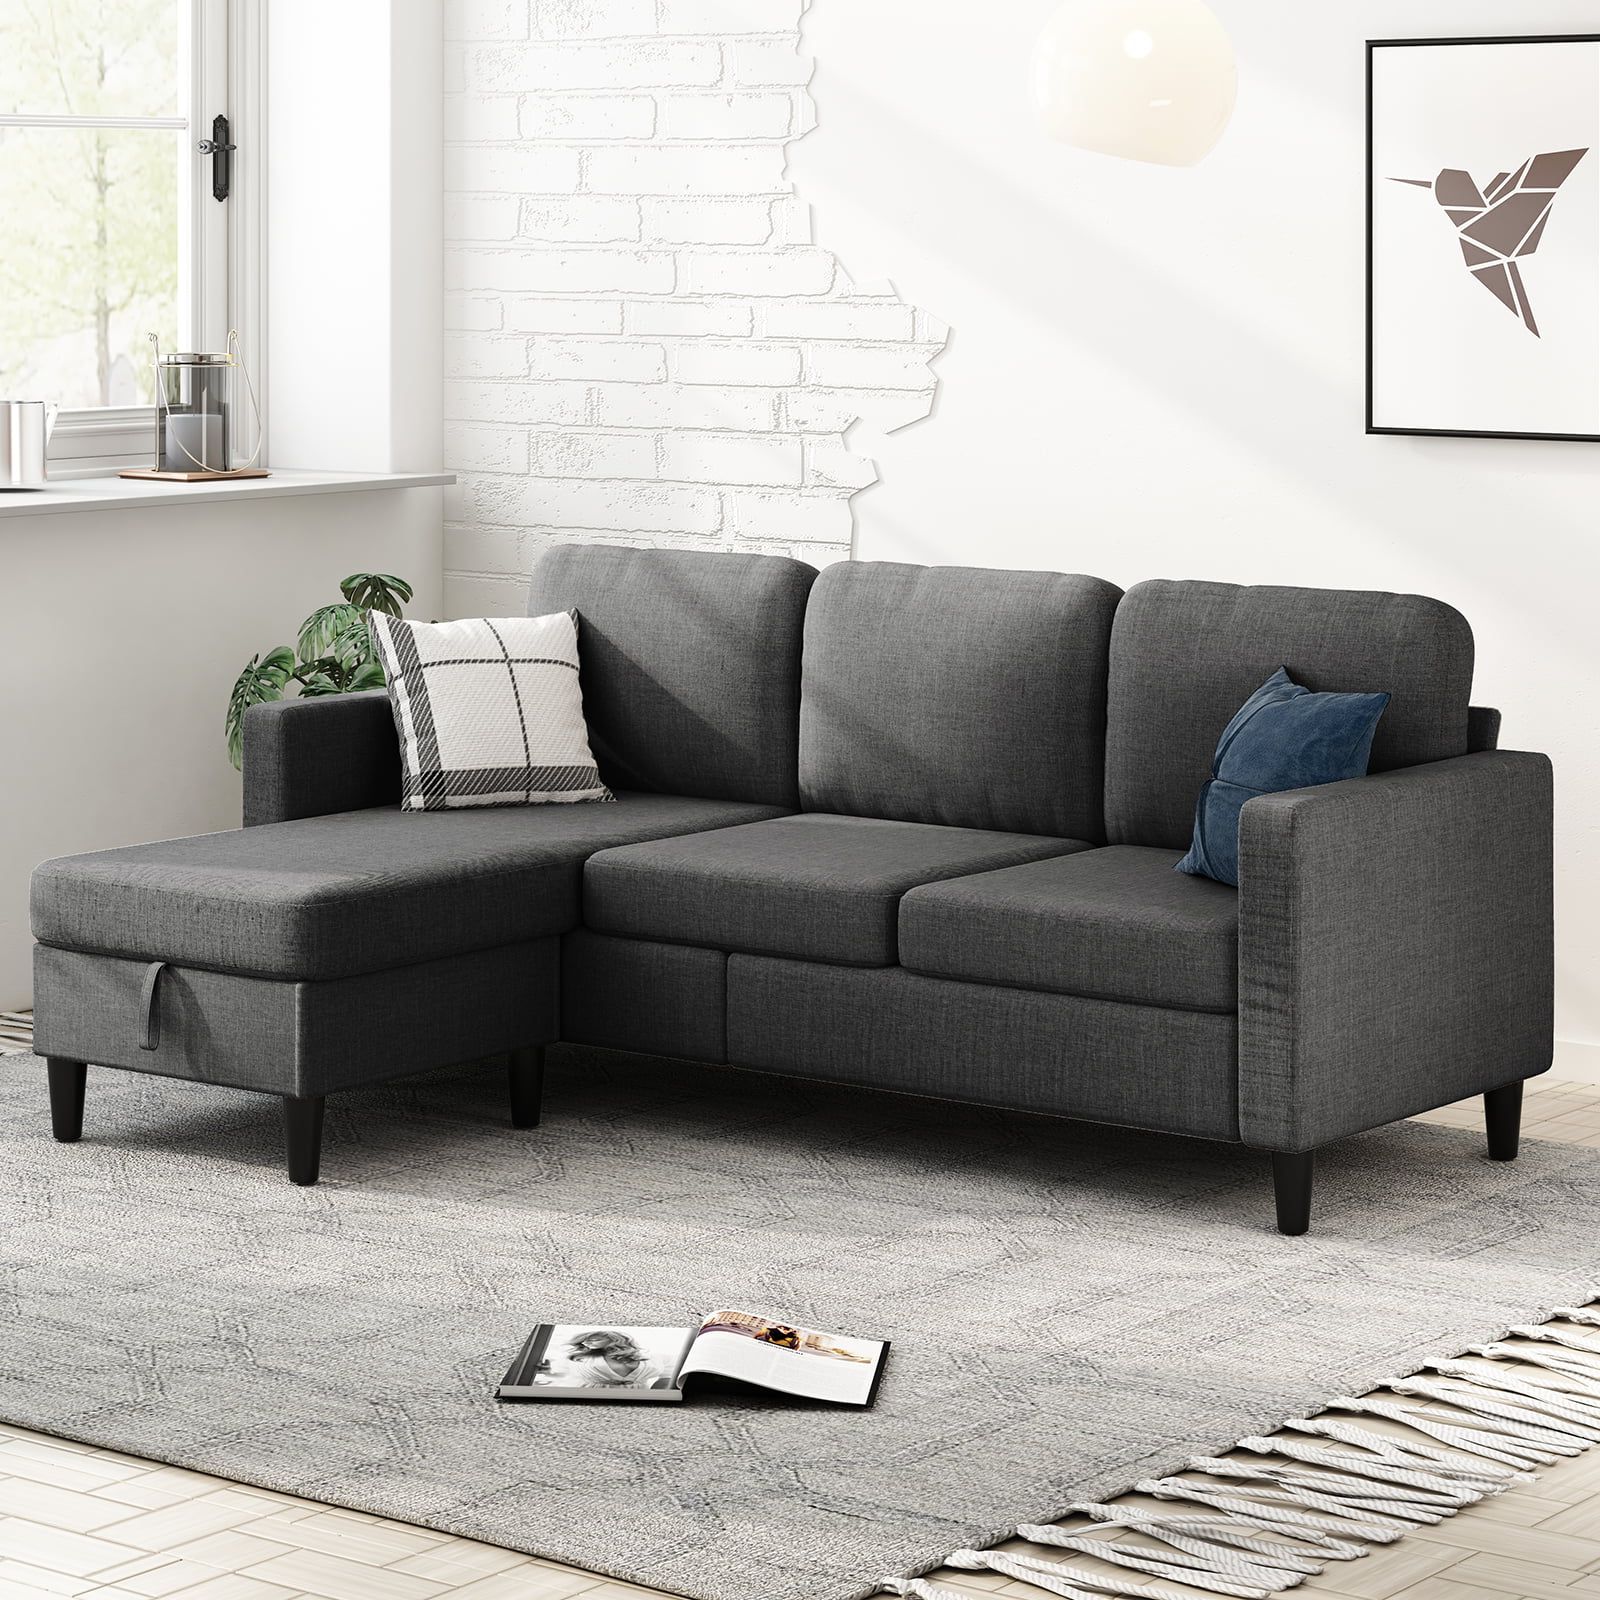 Muzz Sectional Sofa With Movable Ottoman, Free Combination Sectional Couch,  Small L Shaped Sectional Sofa With Storage Ottoman, Modern Linen Fabric Sofa  Set For Living Room (dark Grey) – Walmart For Modern Linen Fabric L Shaped Couches (View 4 of 20)